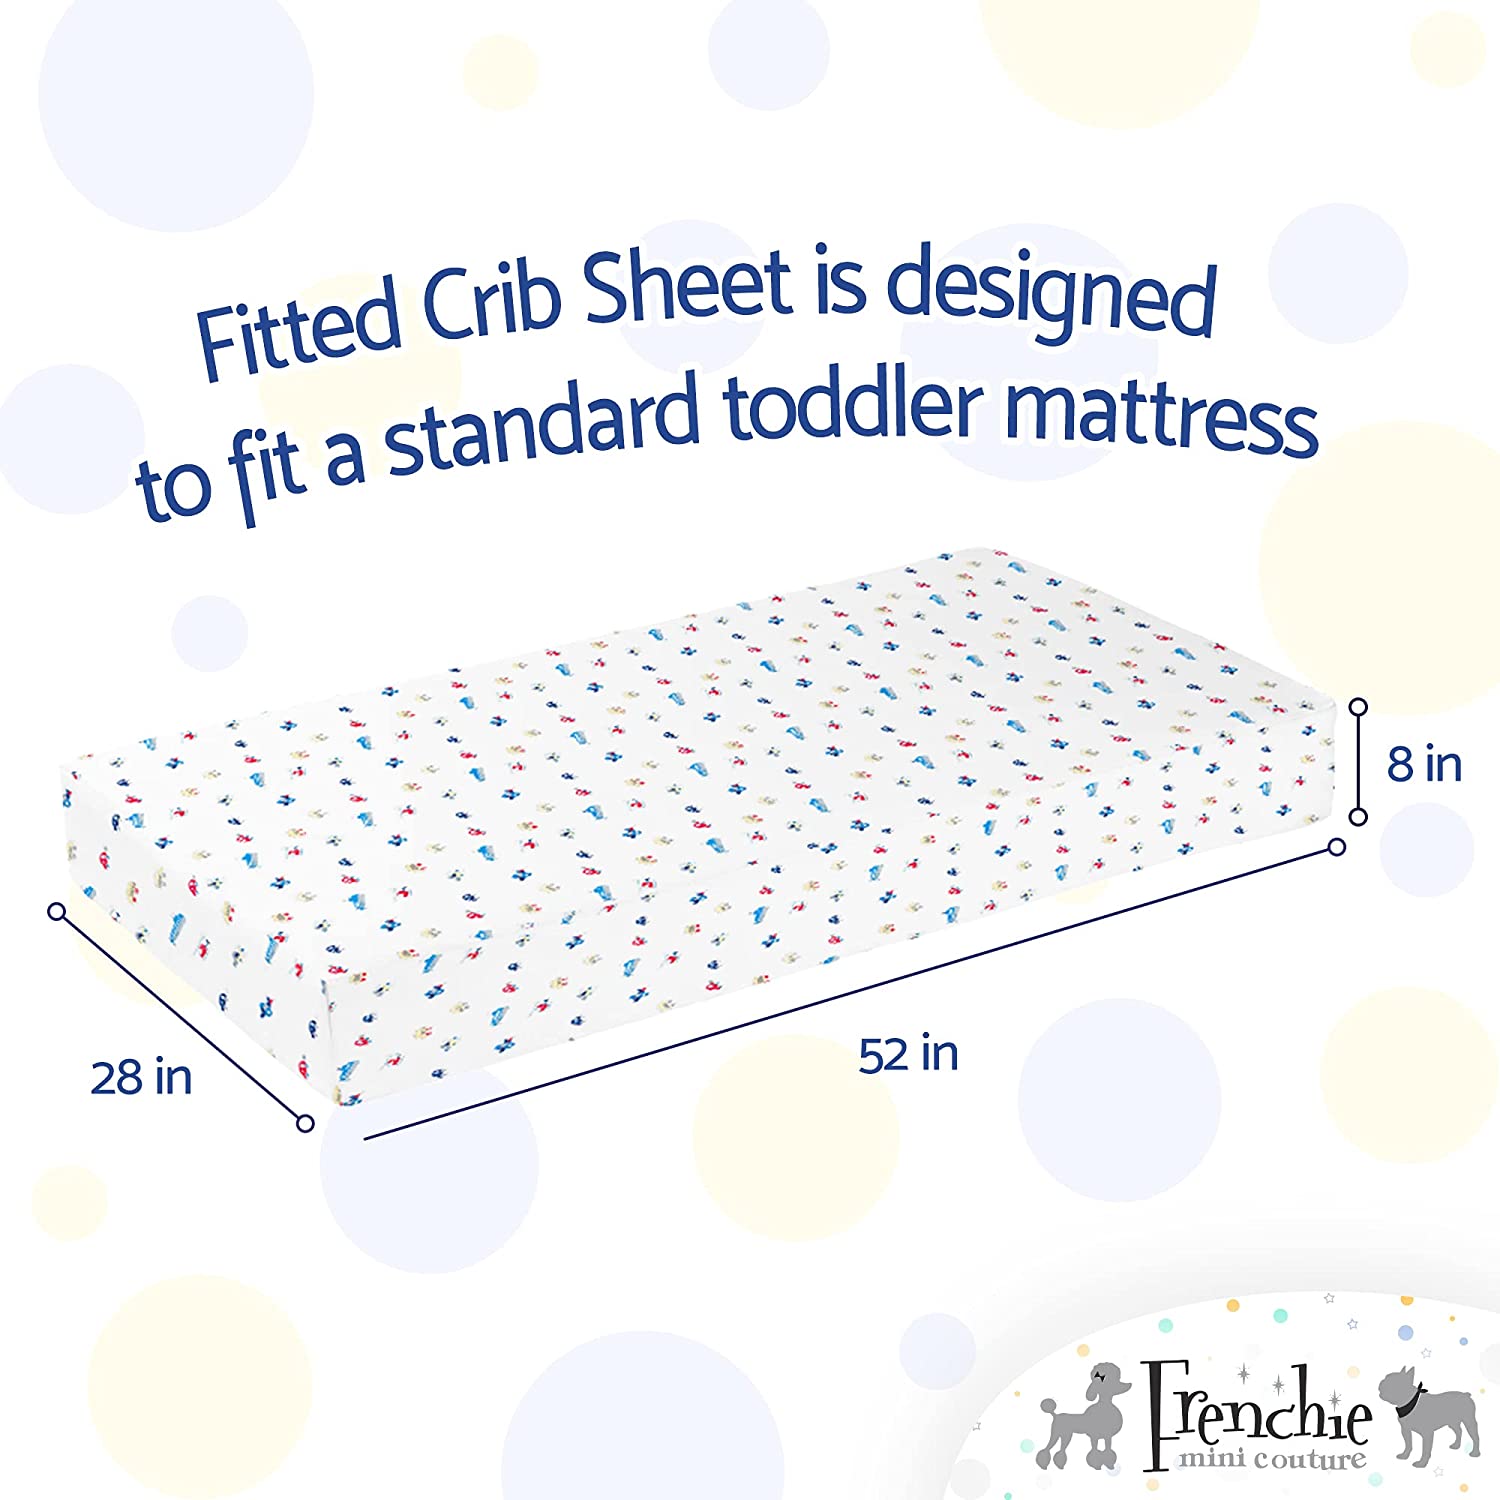 Crib Fitted Sheet for Boys & Girls 100% Woven Cotton, Cars, Boats, Planes, 28 x 52 x 8in, 2-Pack